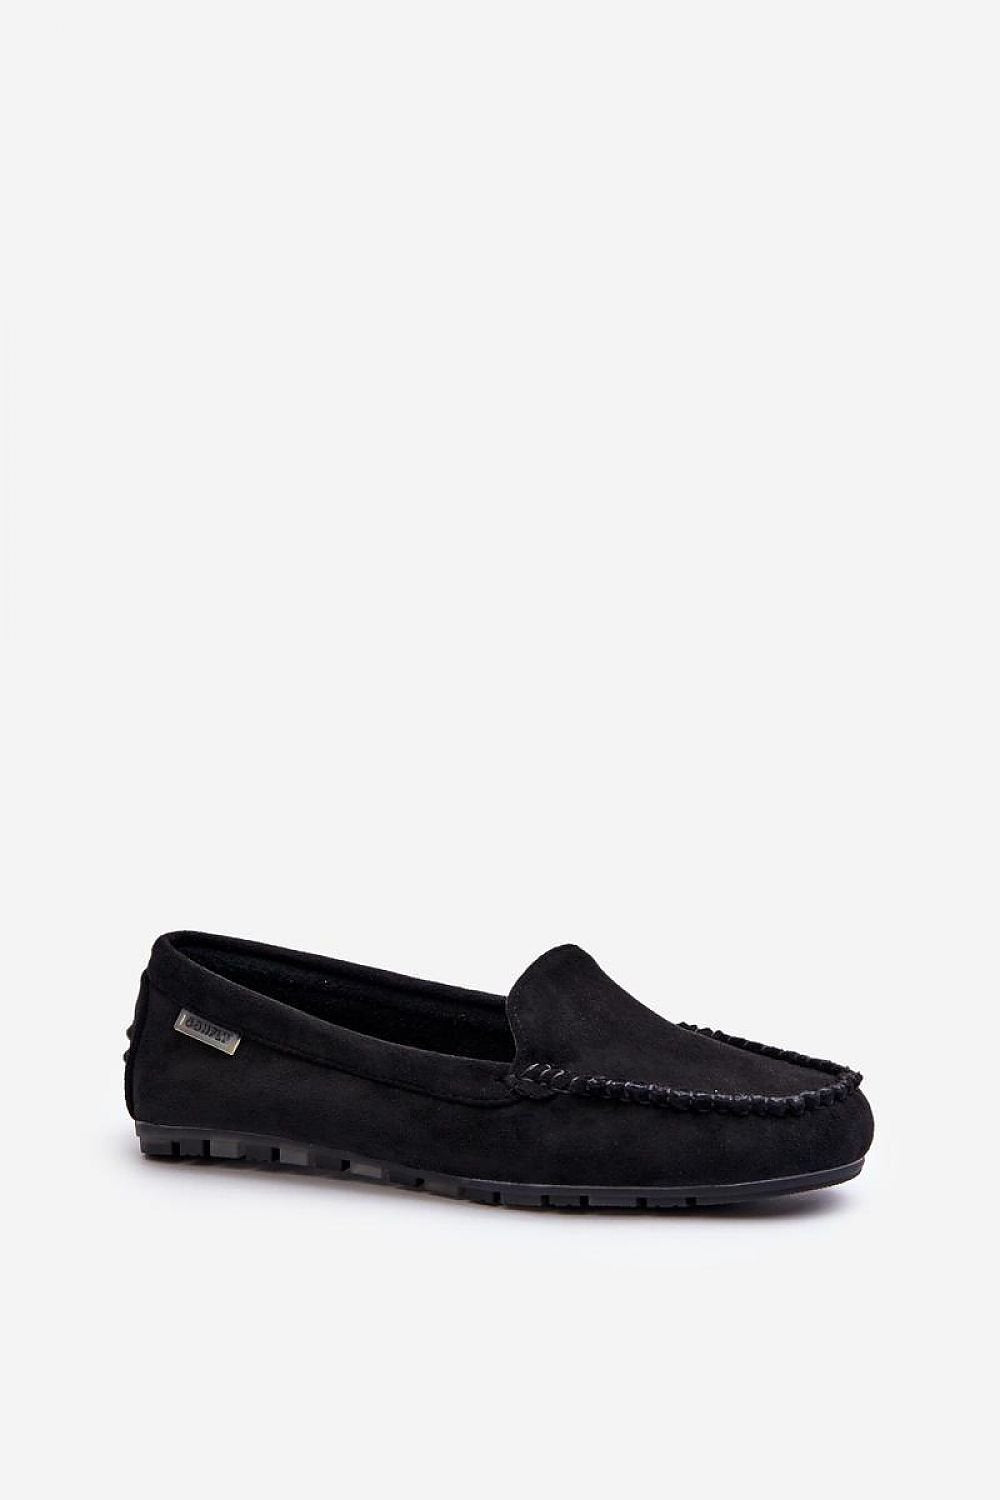 TEEK - Soft Smooth Top Mocassin Loafers SHOES TEEK MH black 6.5 